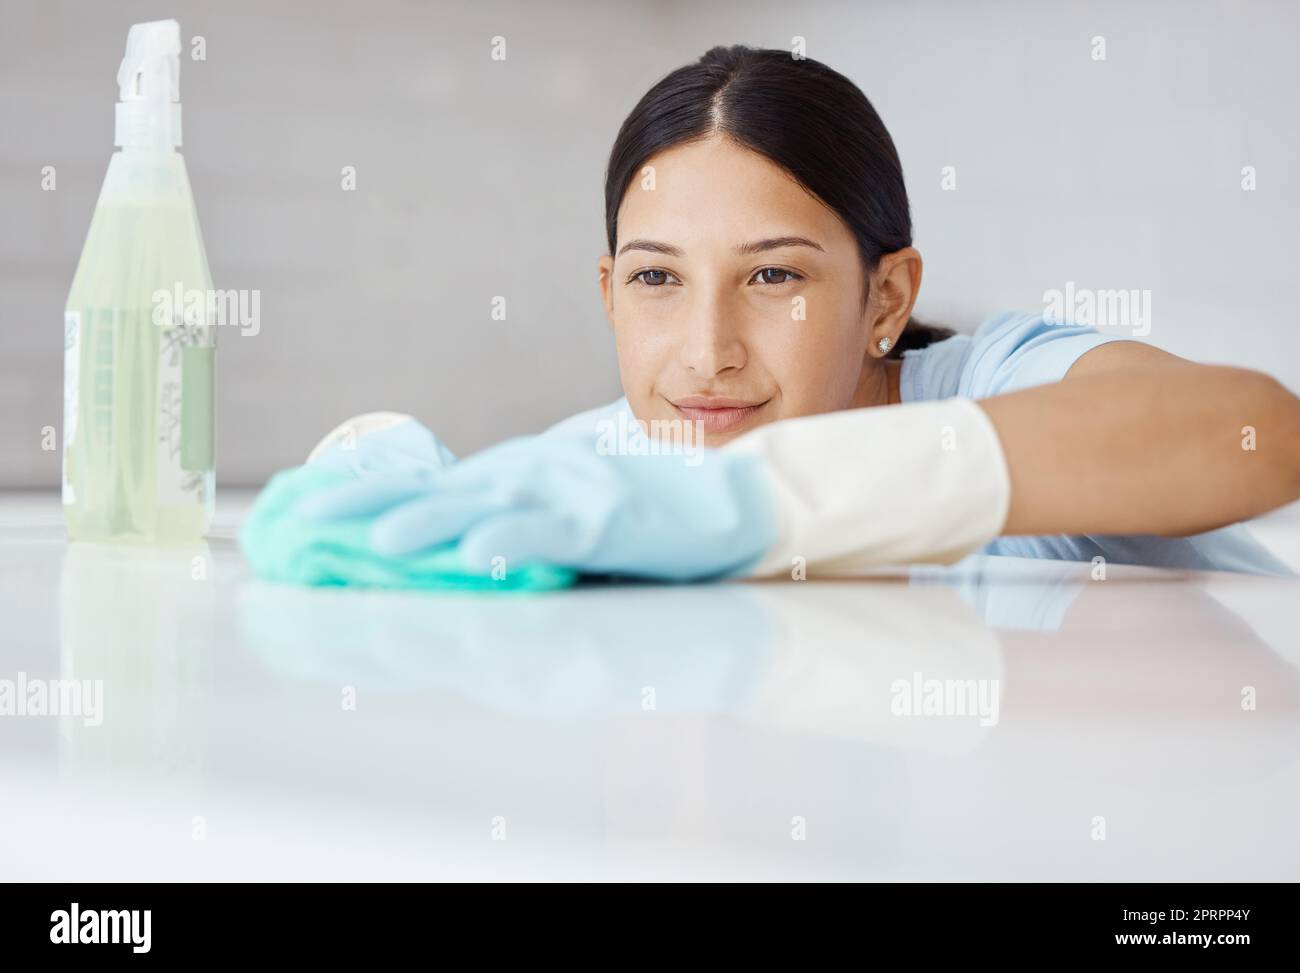 Cleaning, disinfect and housework with woman washing kitchen table with spray product to sanitize, clean and for hygiene. Housewife, cleaner or housekeeper with sanitary detergent and tidy apartment Stock Photo